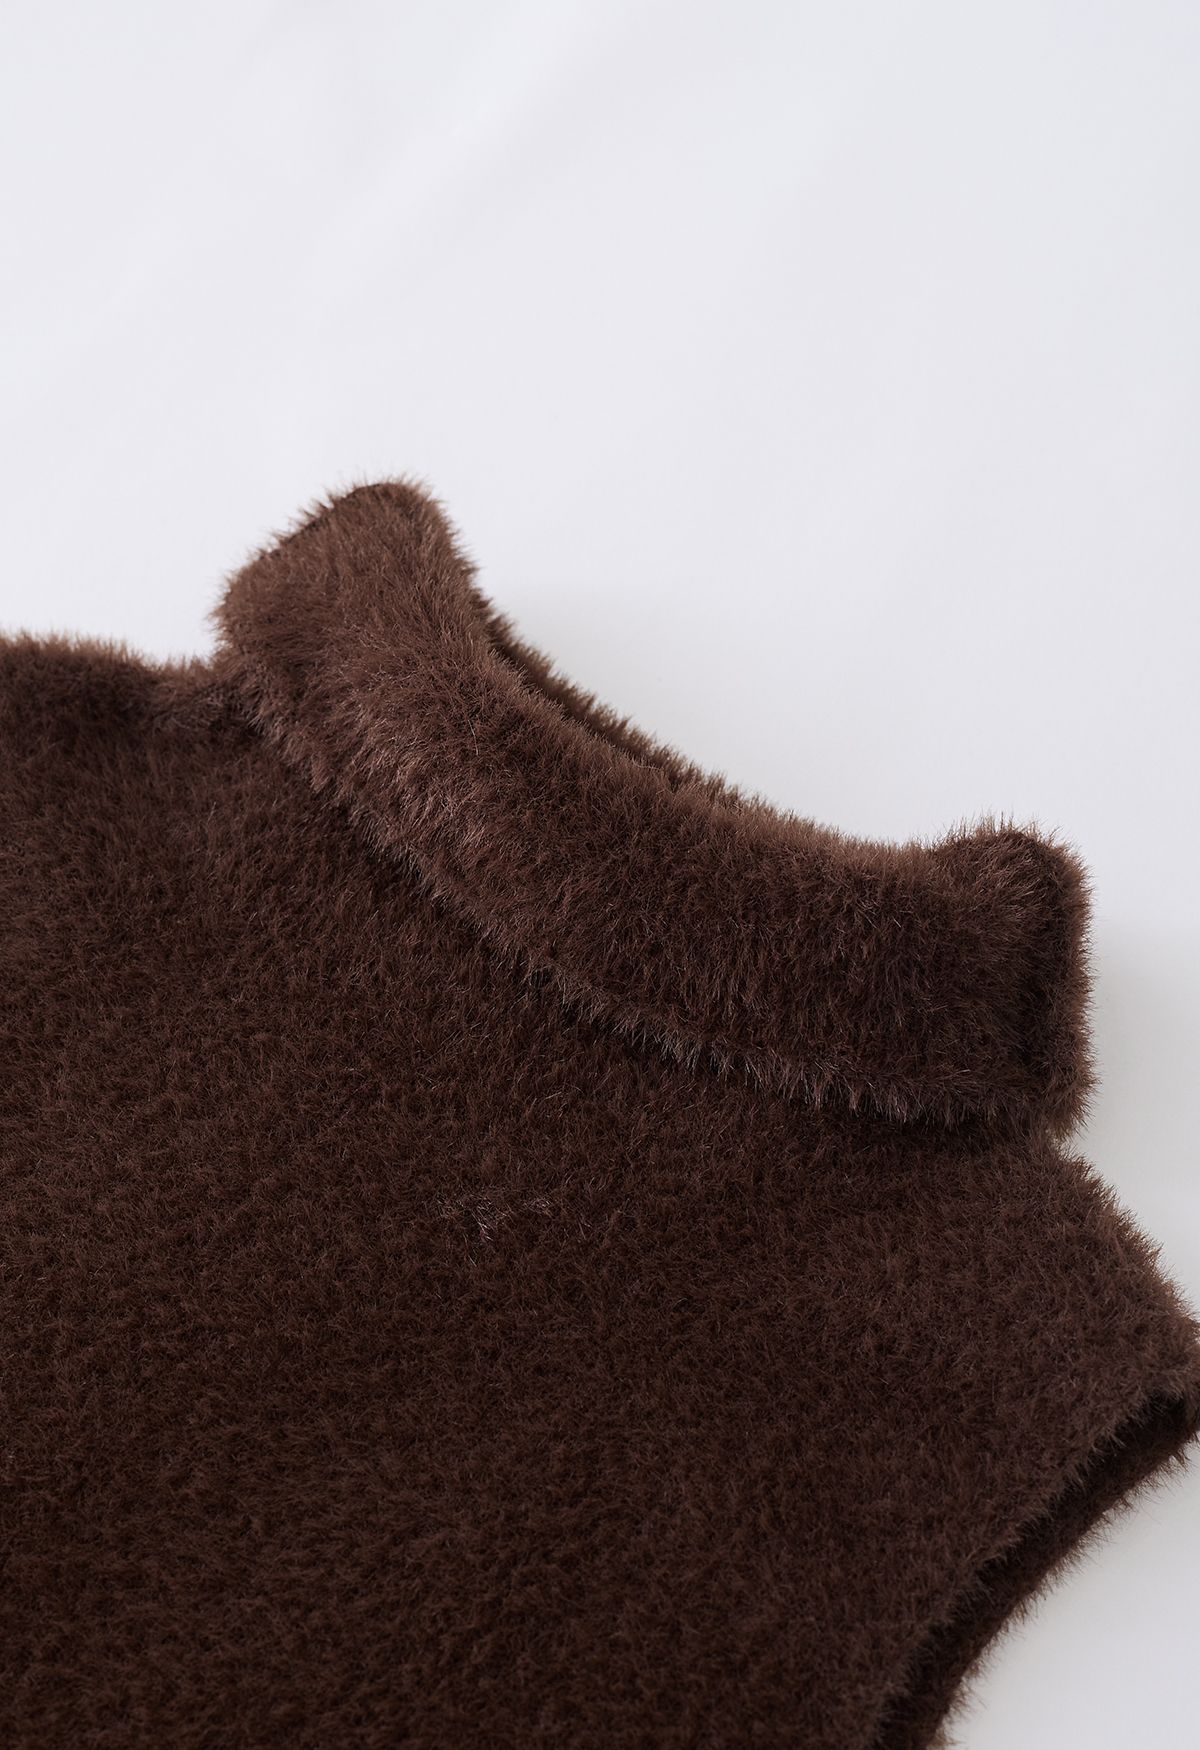 High Neck Fuzzy Knit Tank Top in Brown